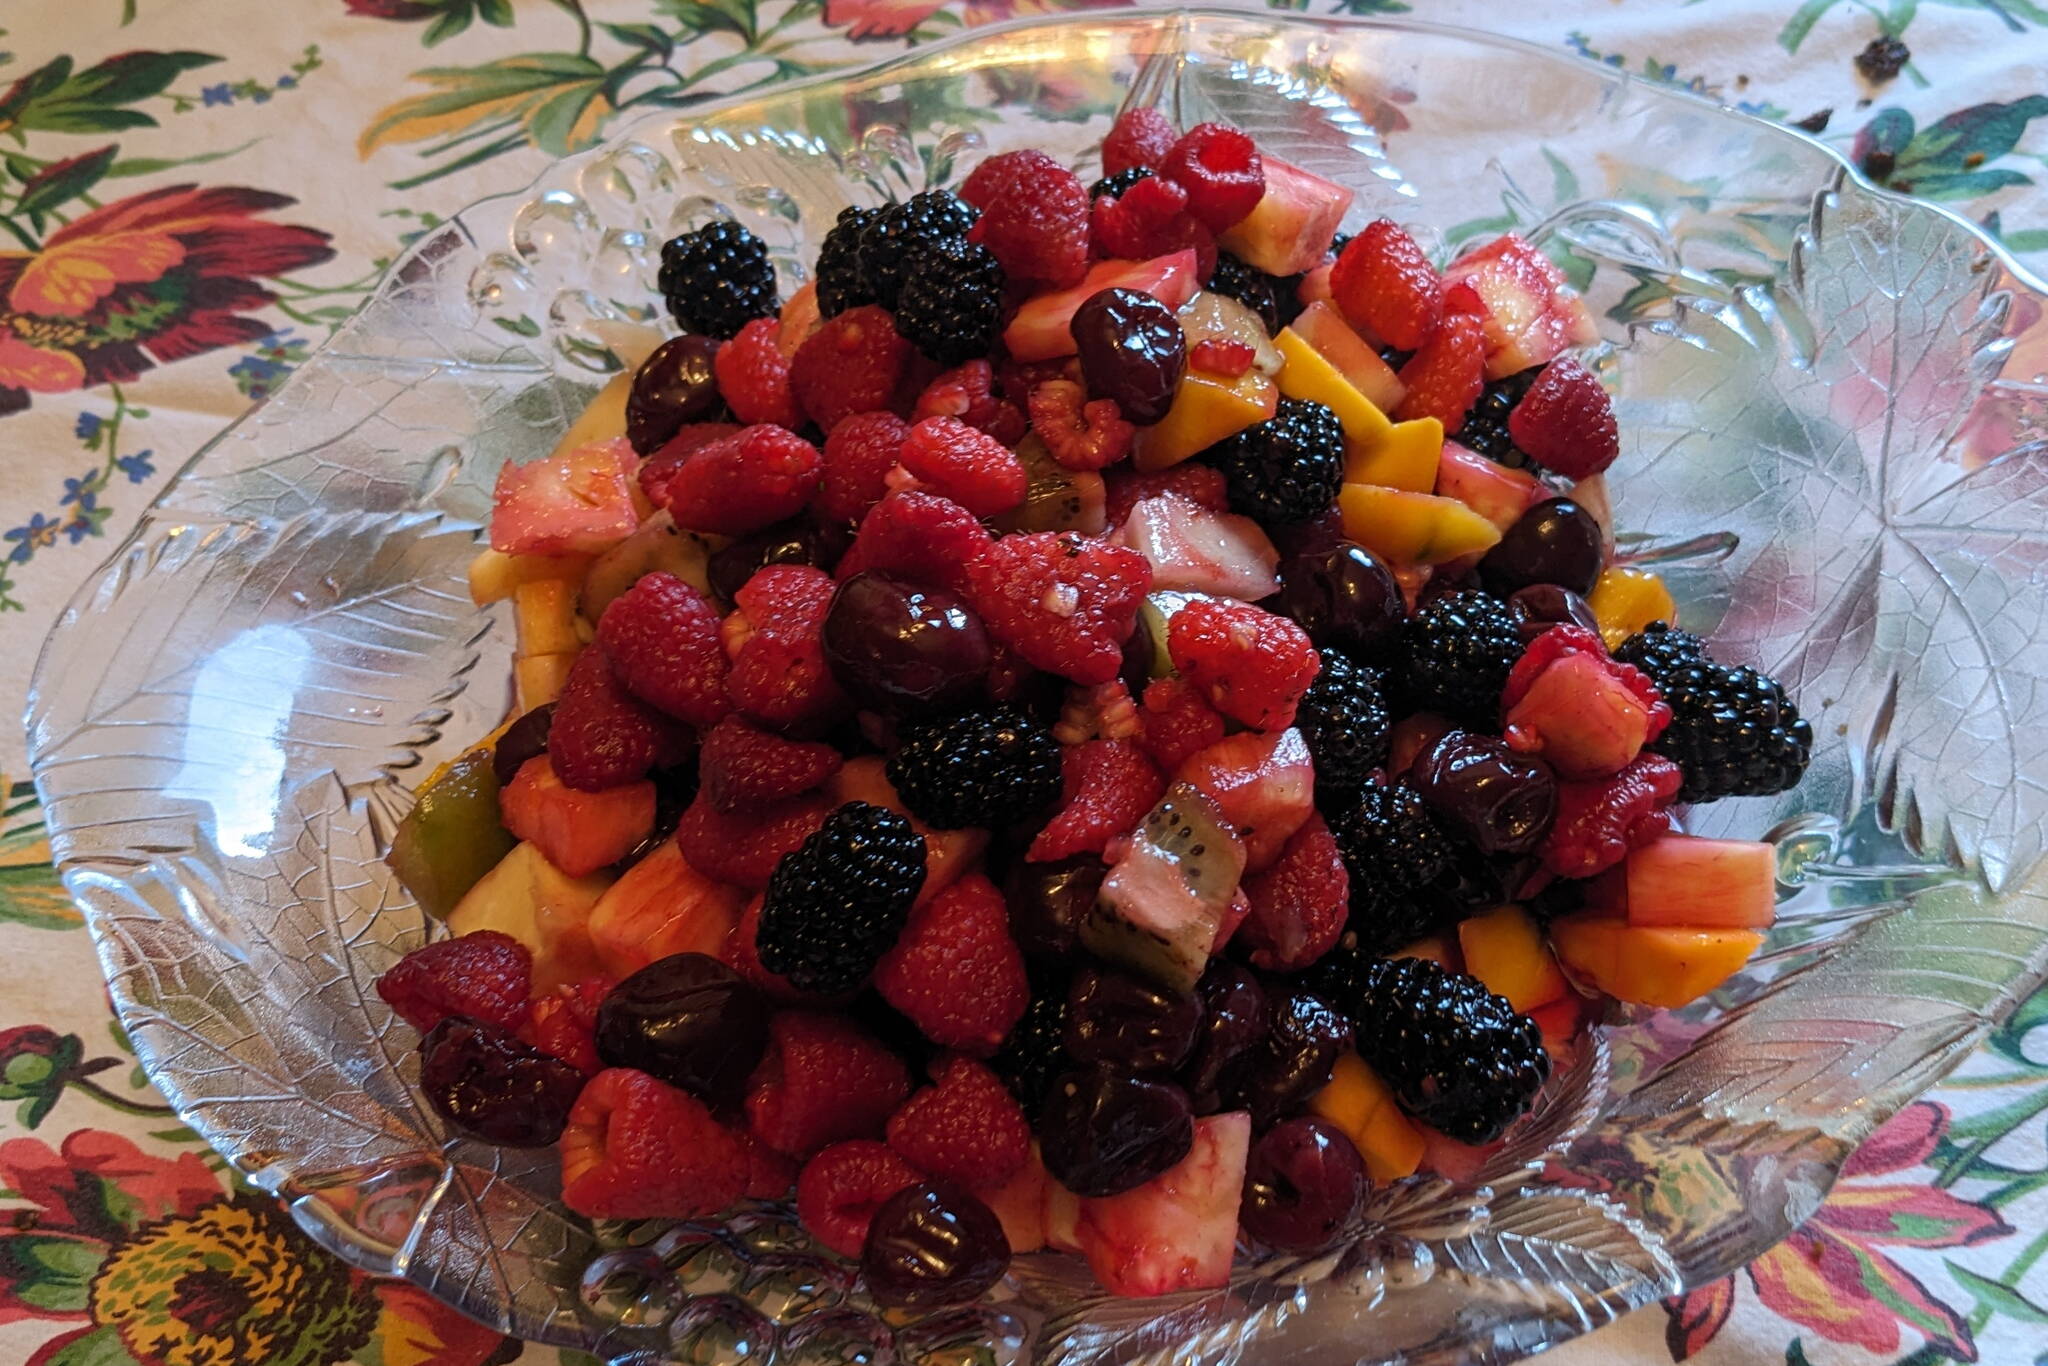 A fruit salad that can be adjusted to fit the foods of the season. (Photo by Patty Schied)